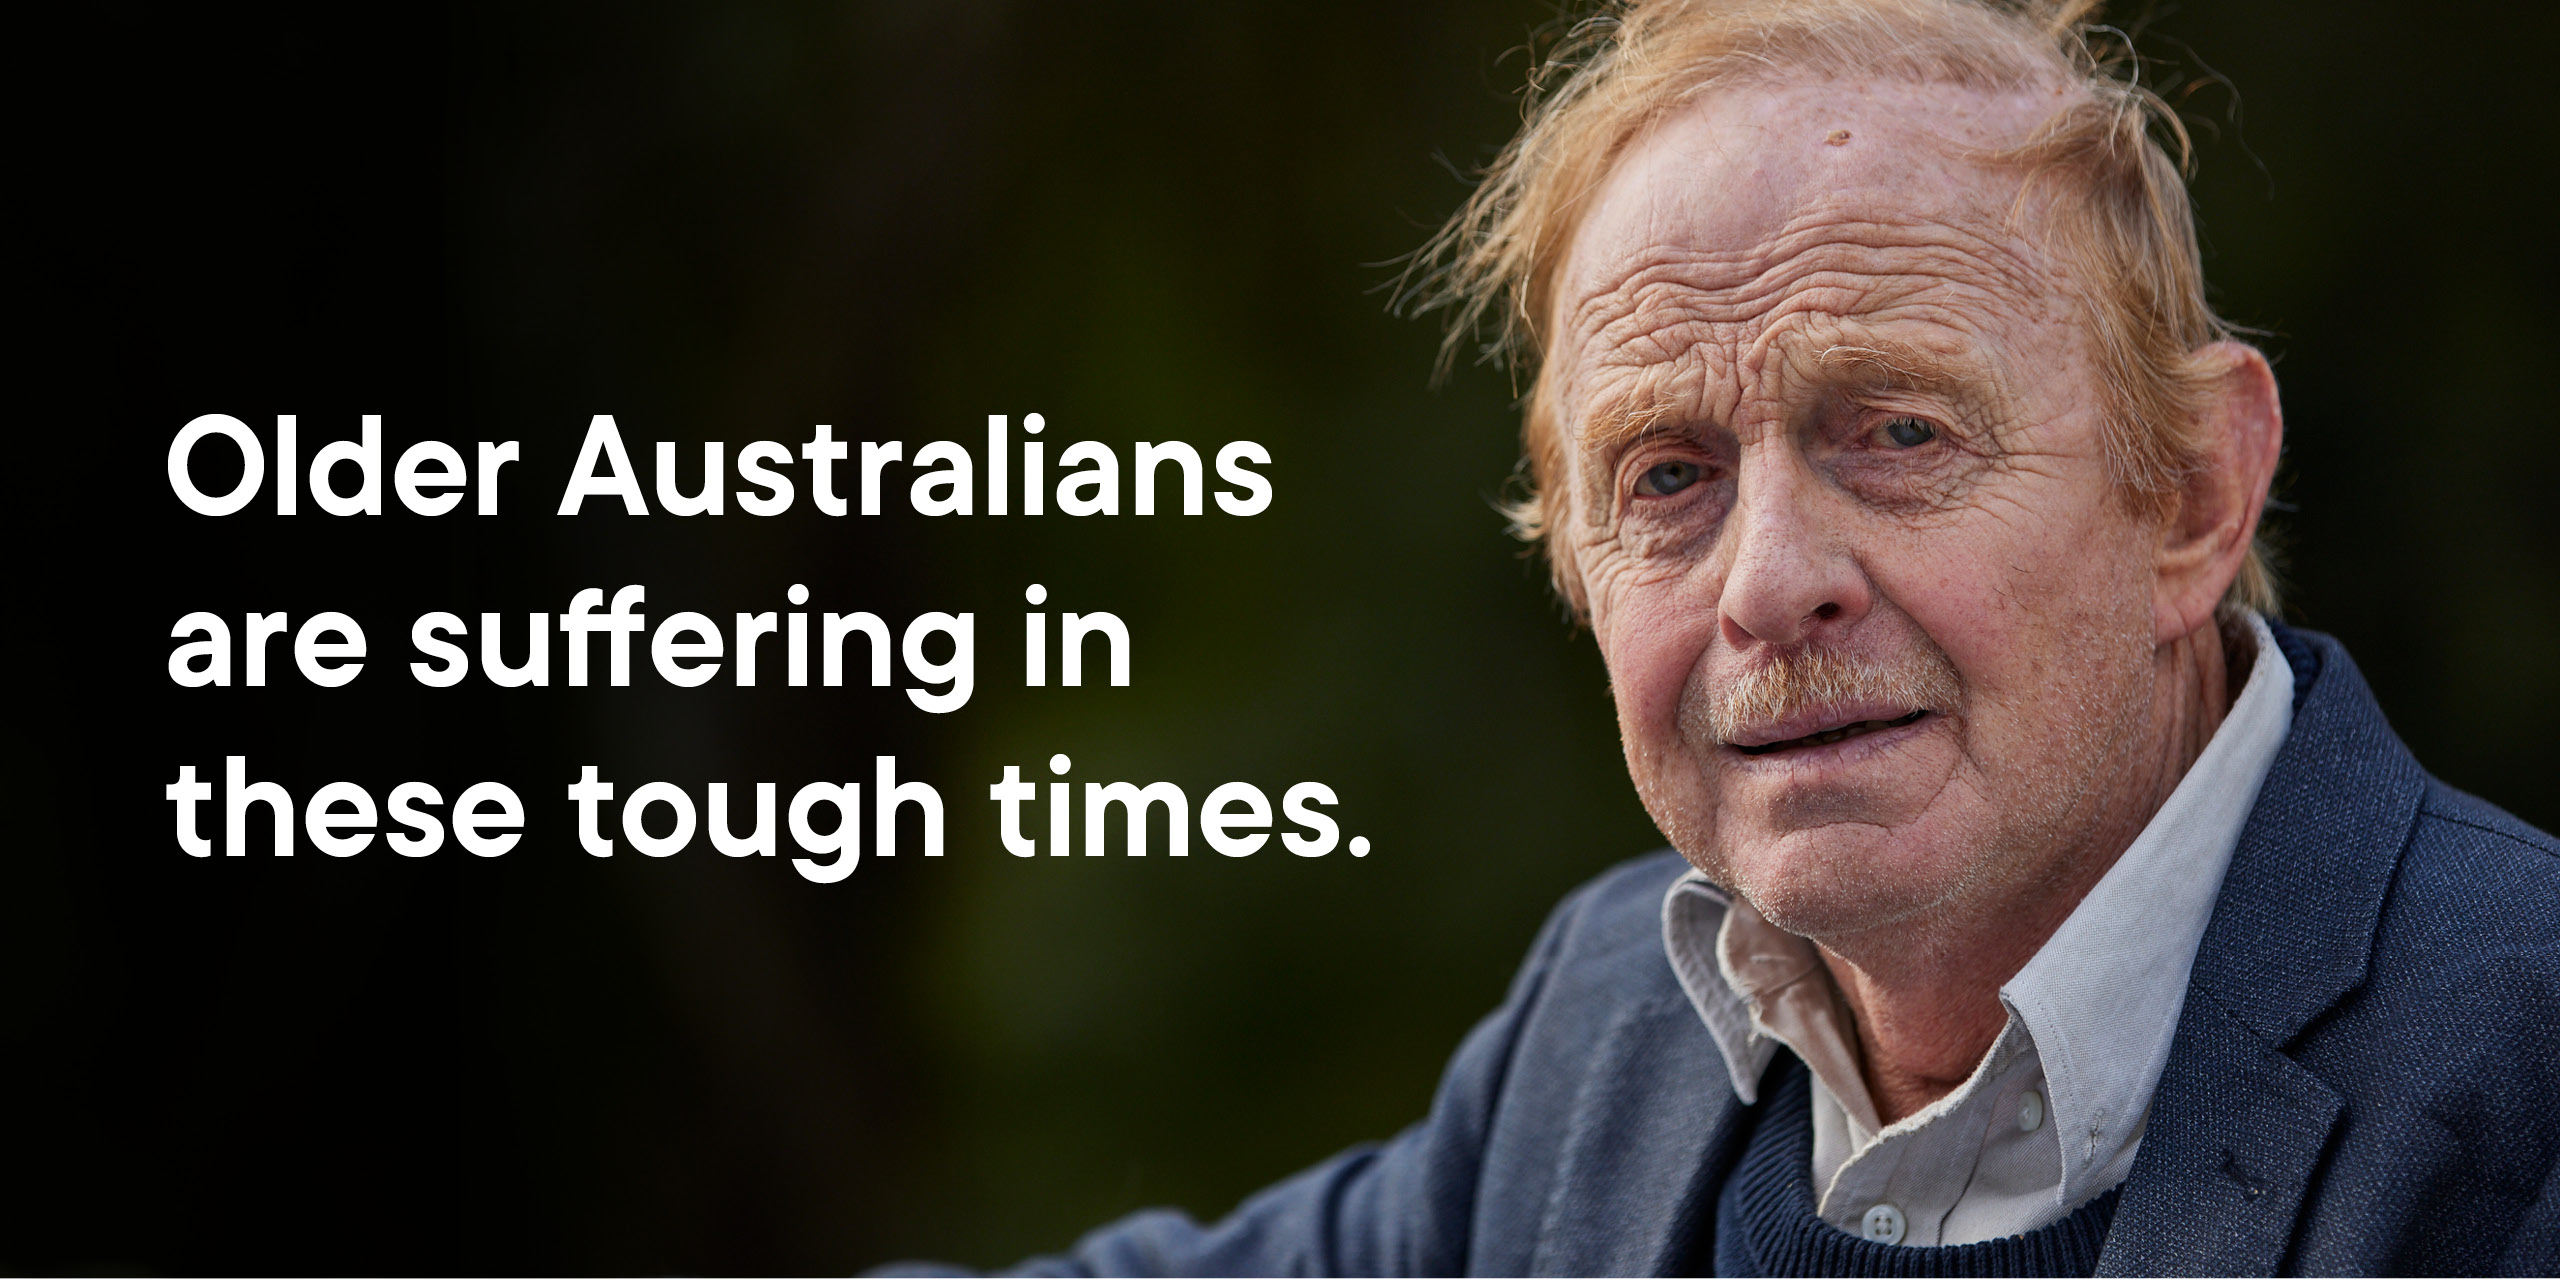 image of Graham with text stating that older Australians are suffering in these tough times. 